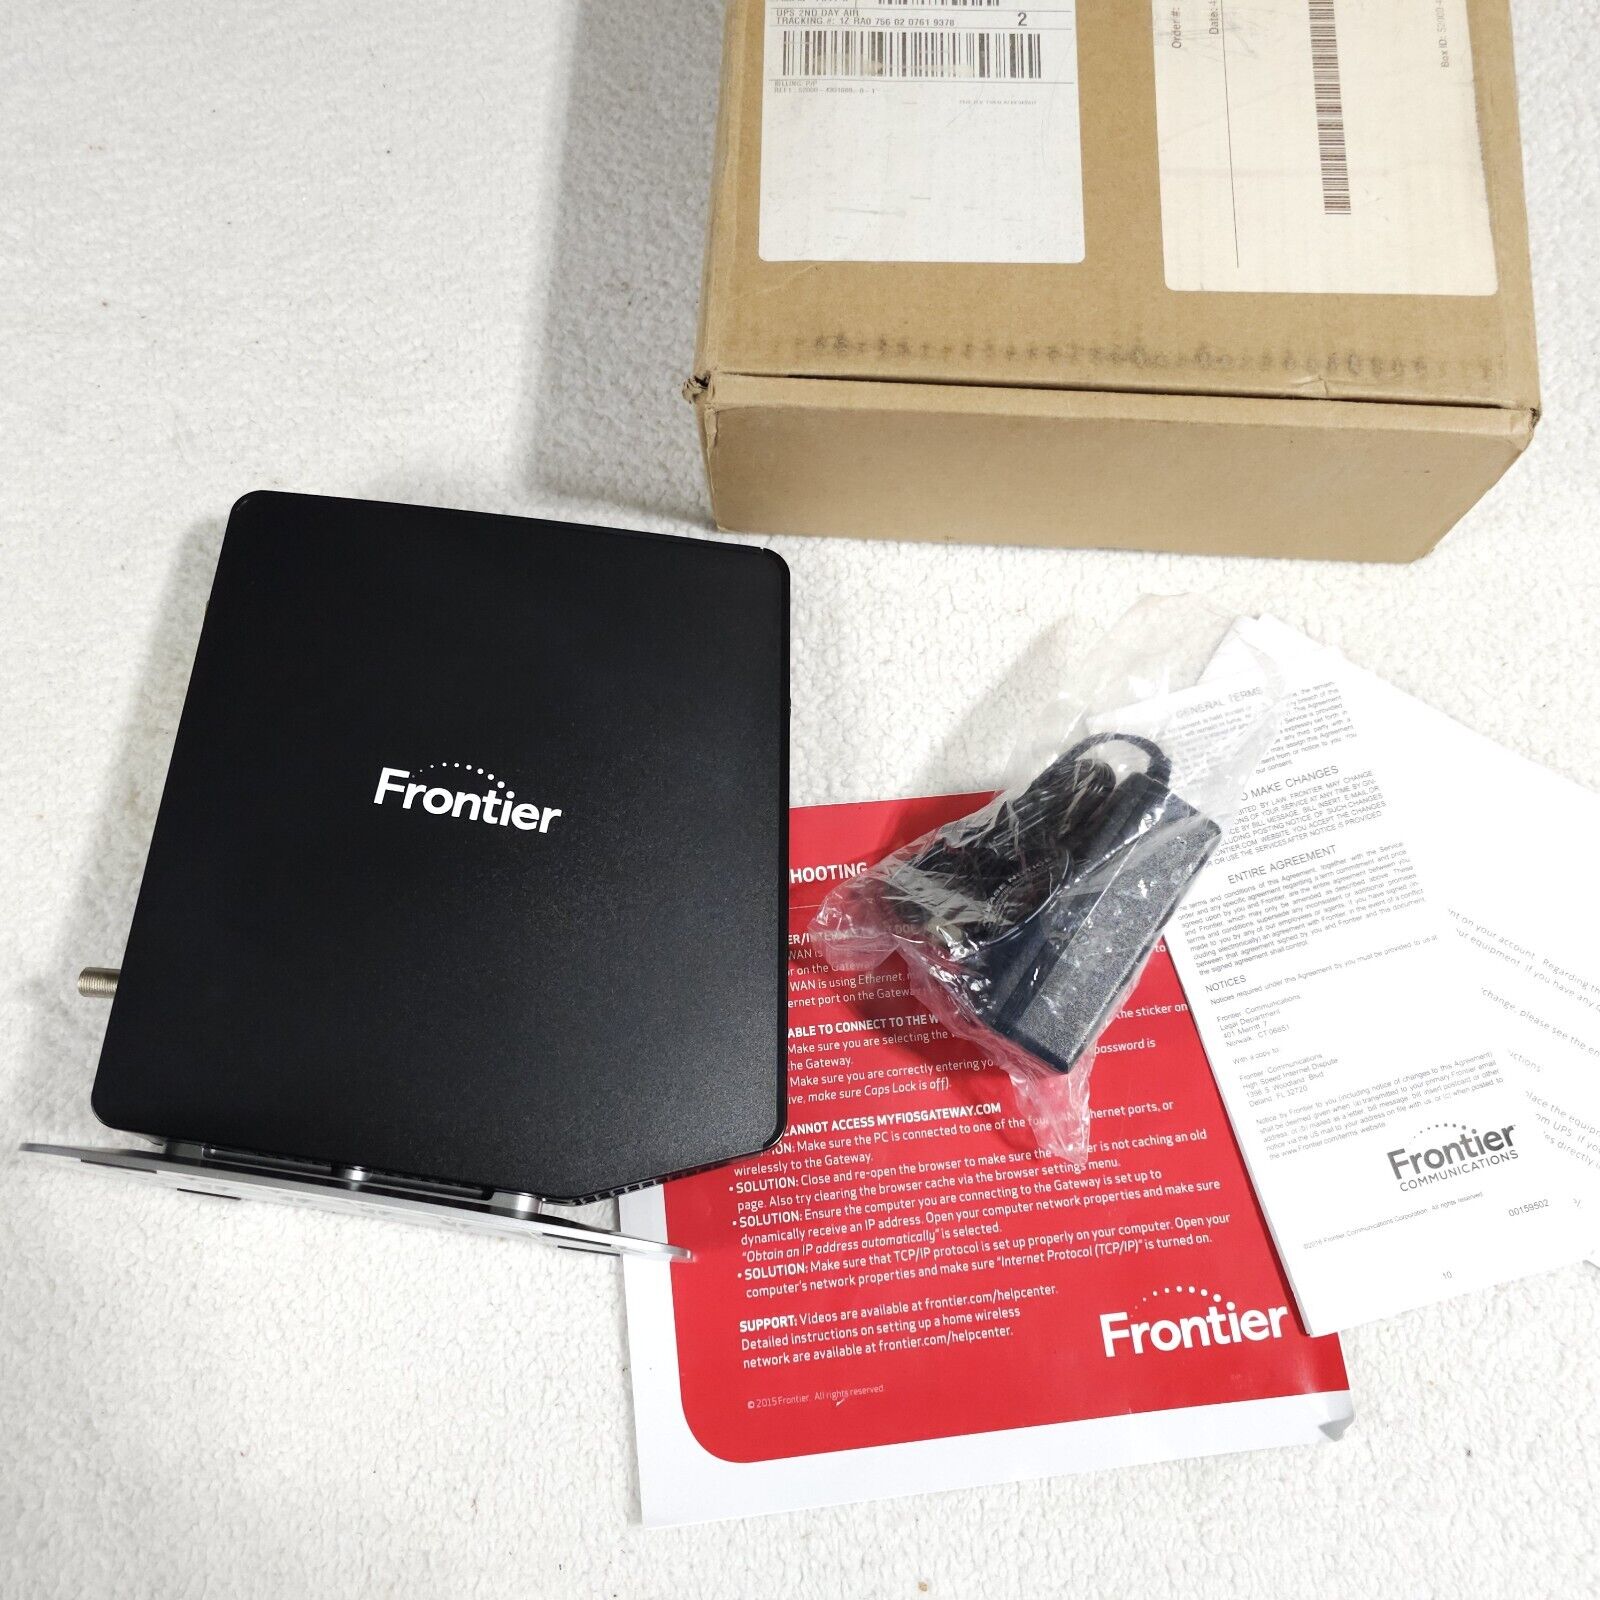 Frontier FiOS-G1100 FT Dual Band Gateway 4-Port Wireless Router w/ Adapter